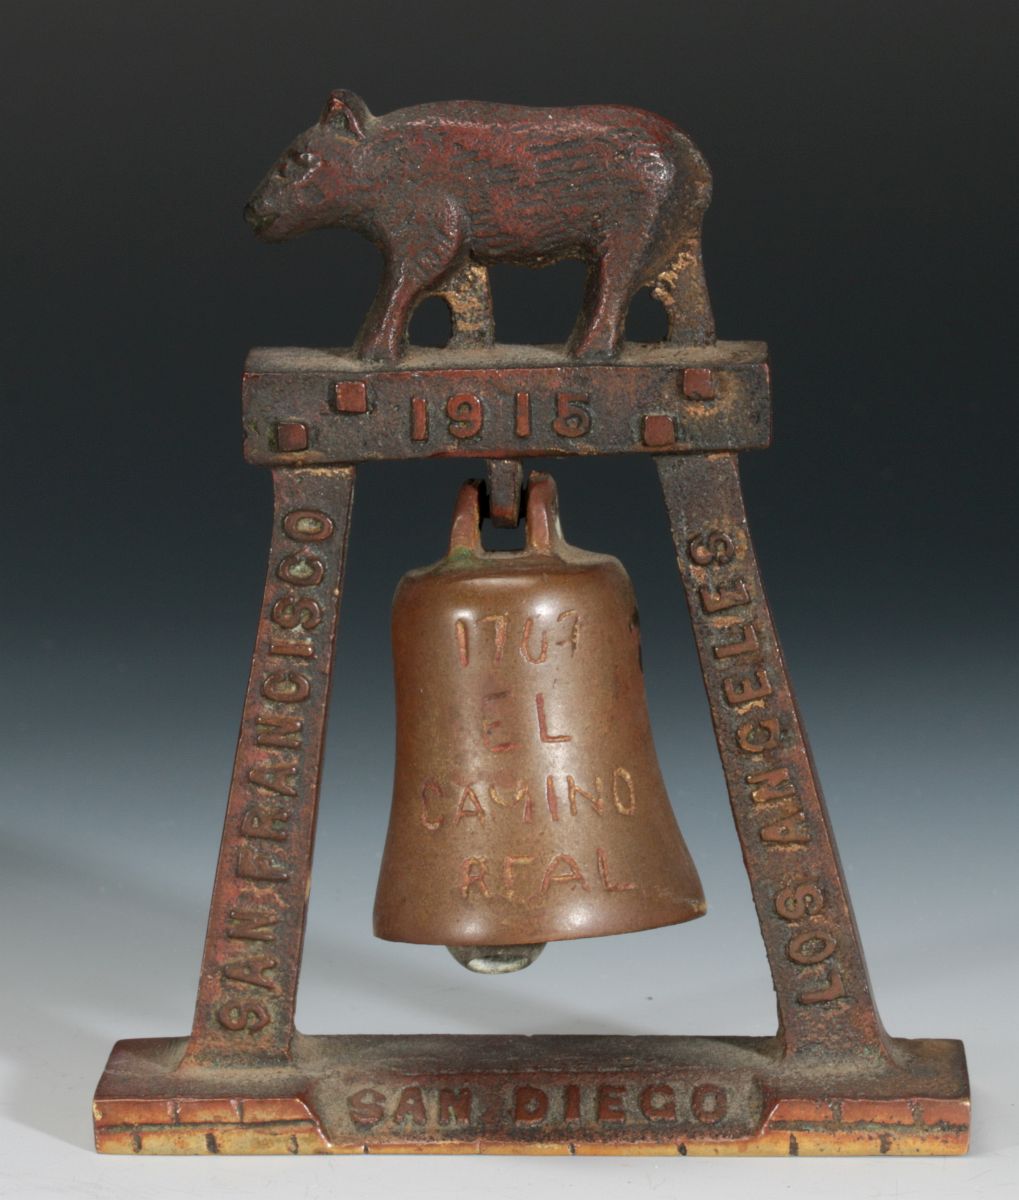 A 1915 CALIFORNIA MISSION BELL SOUVENIR PAPERWEIGHT